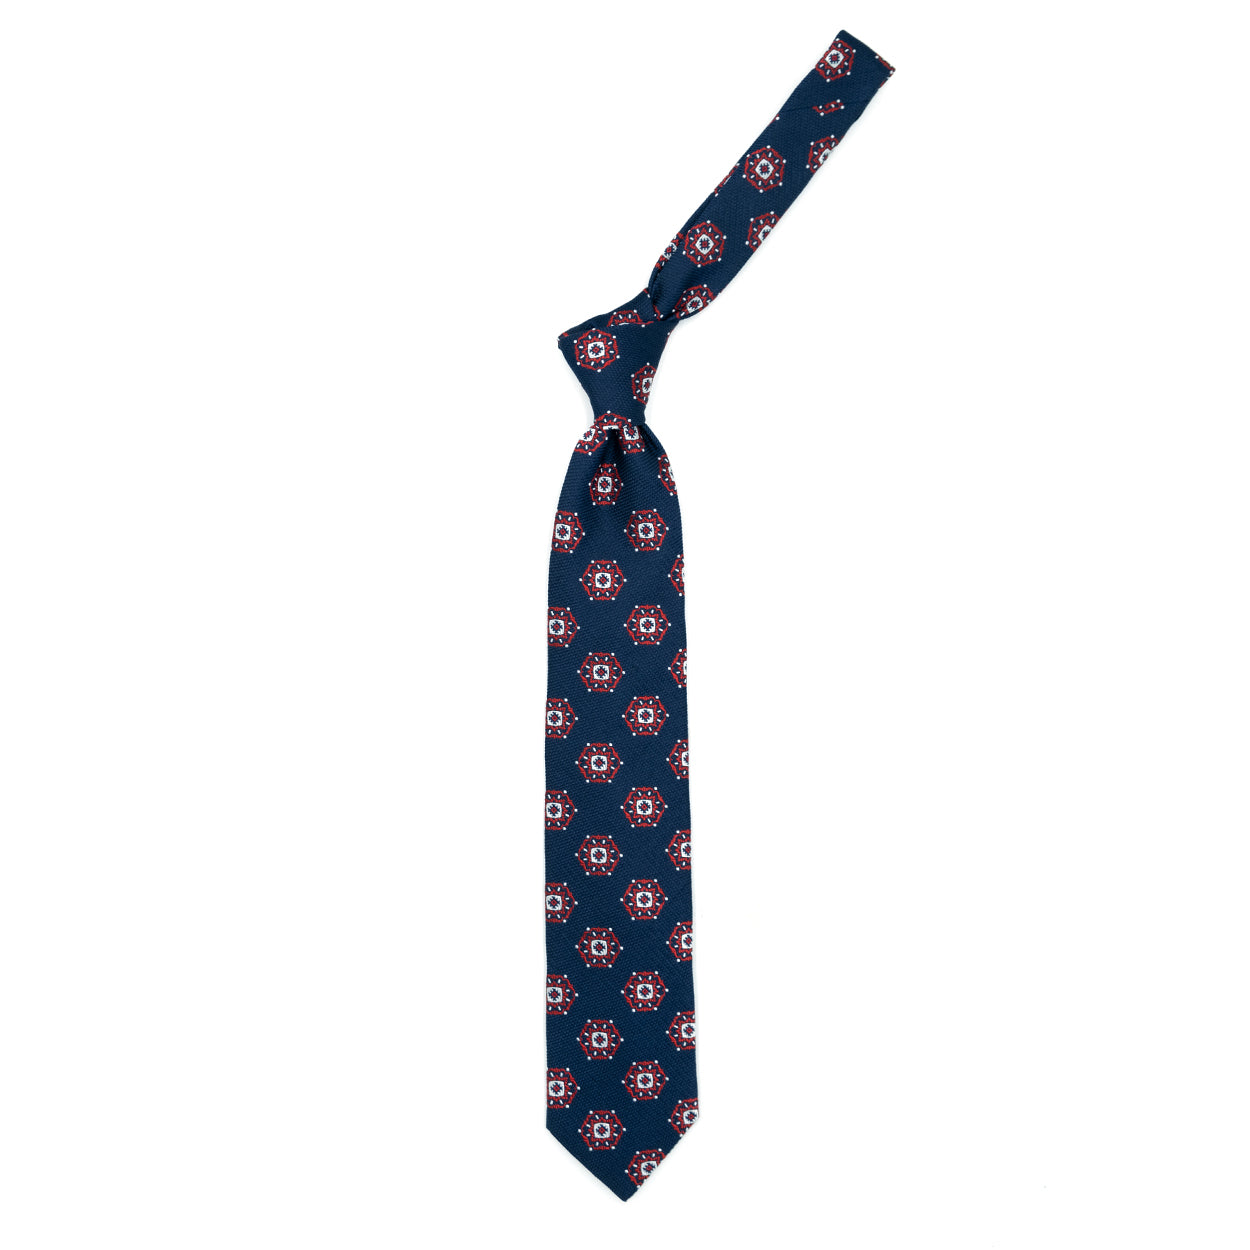 Blue tie with red and white medallions